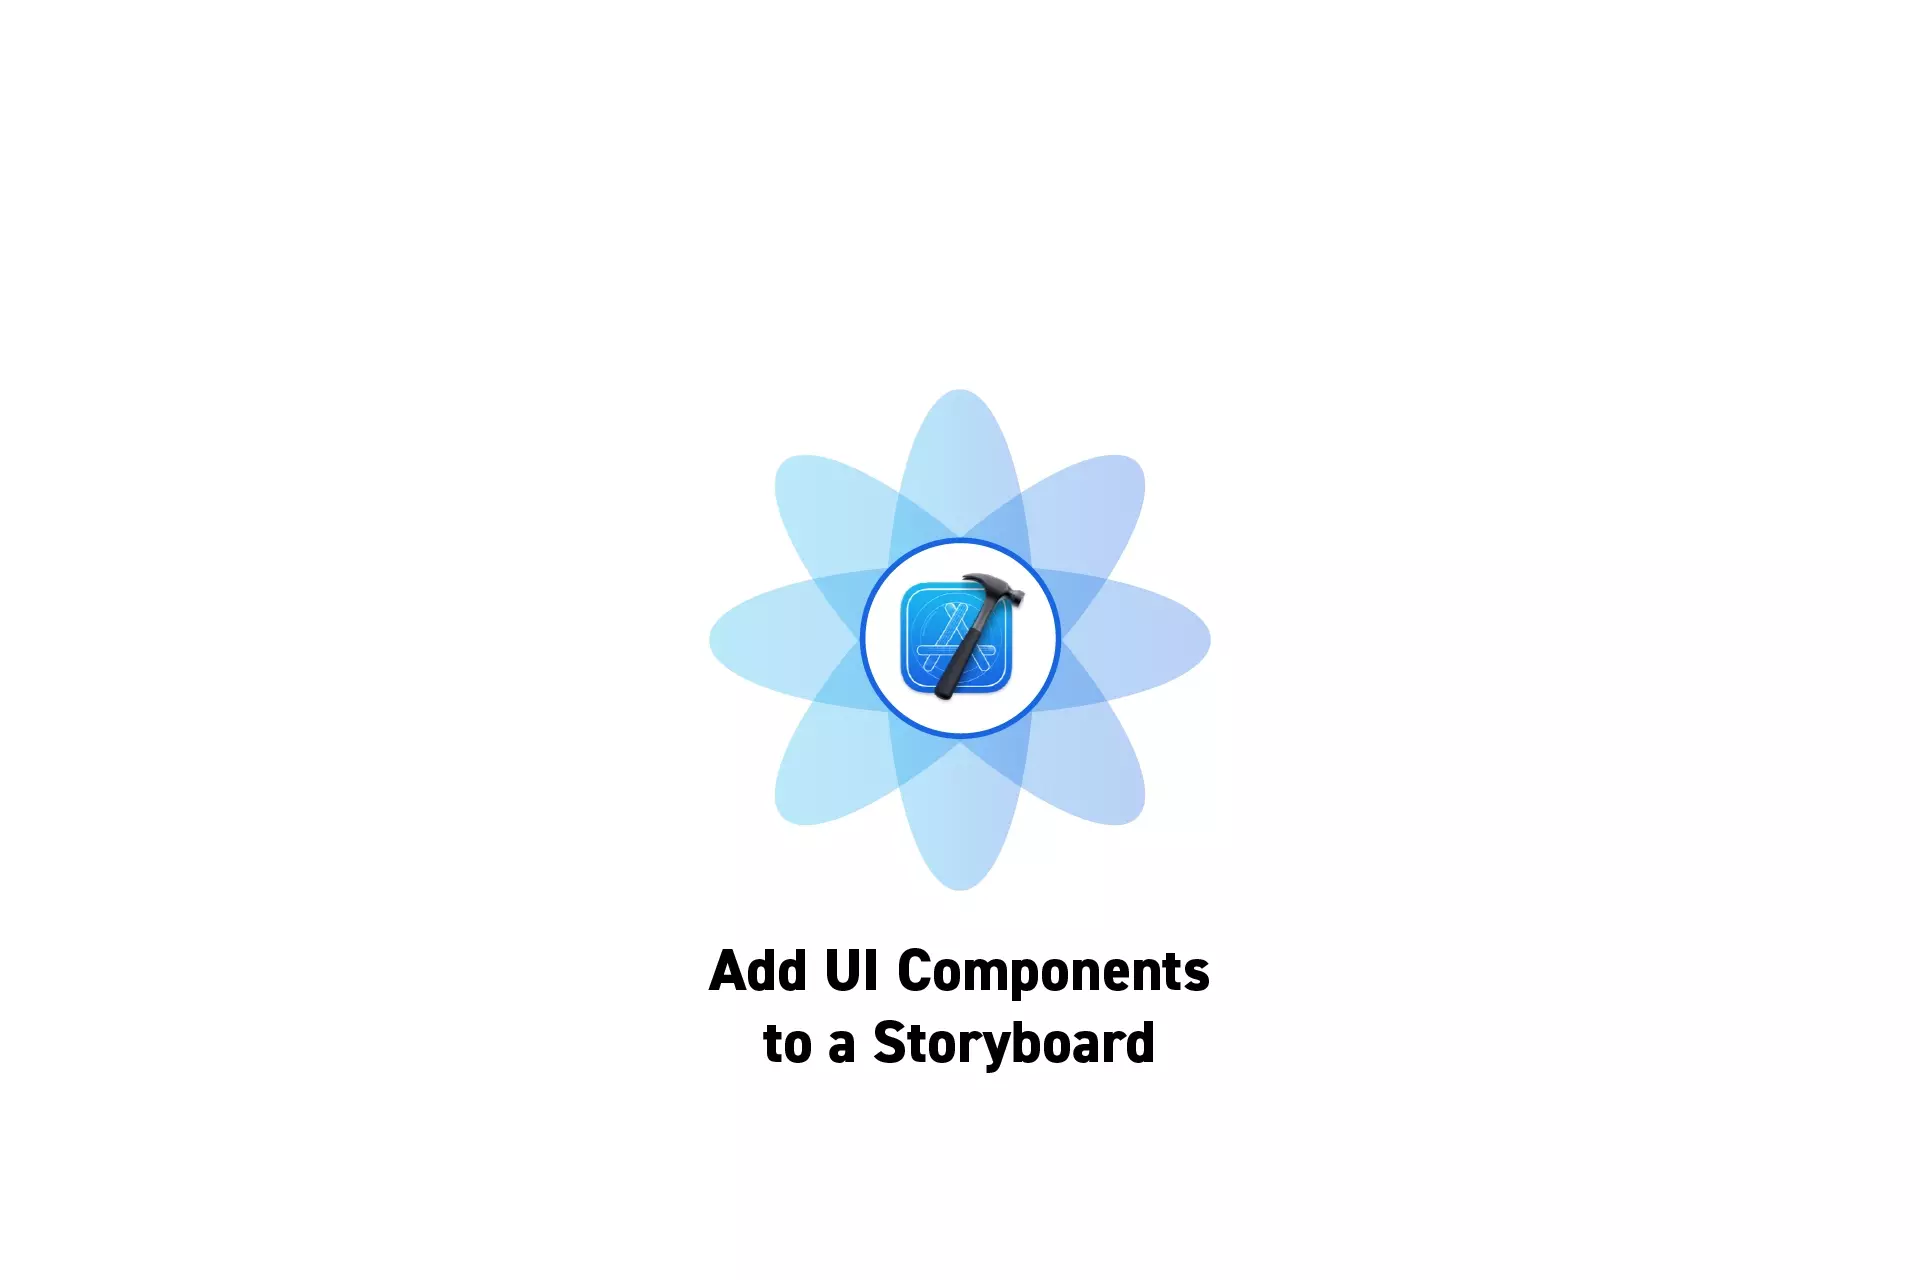 A flower that represents Xcode with the text "Add UI Components to a Storyboard" beneath it.